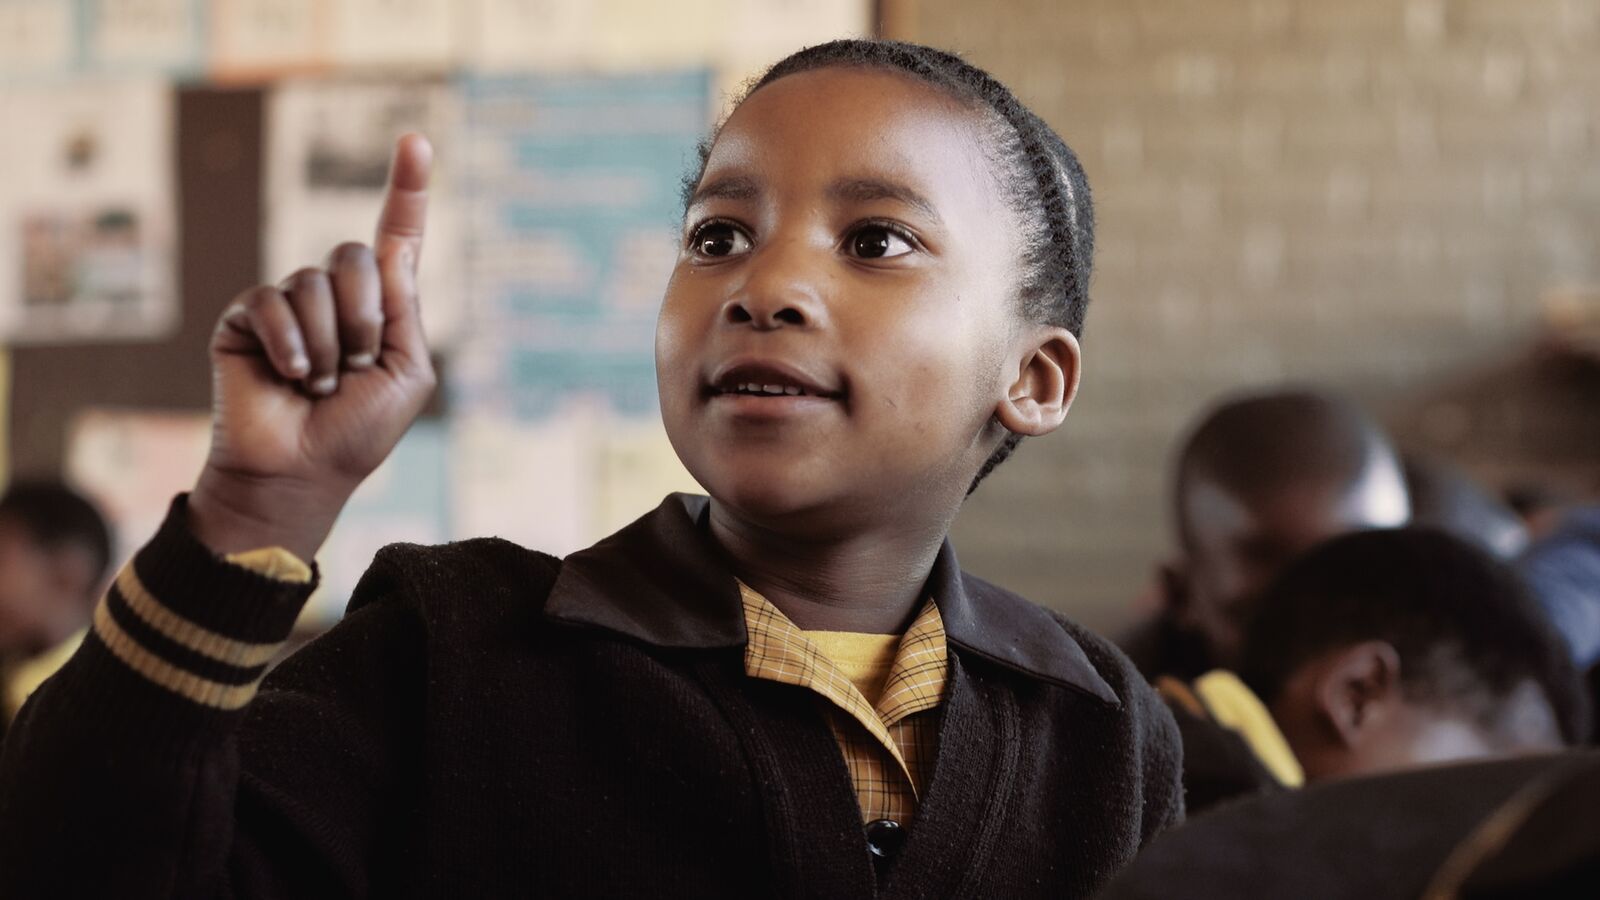 A student in a classroom in South Africa raises her hand